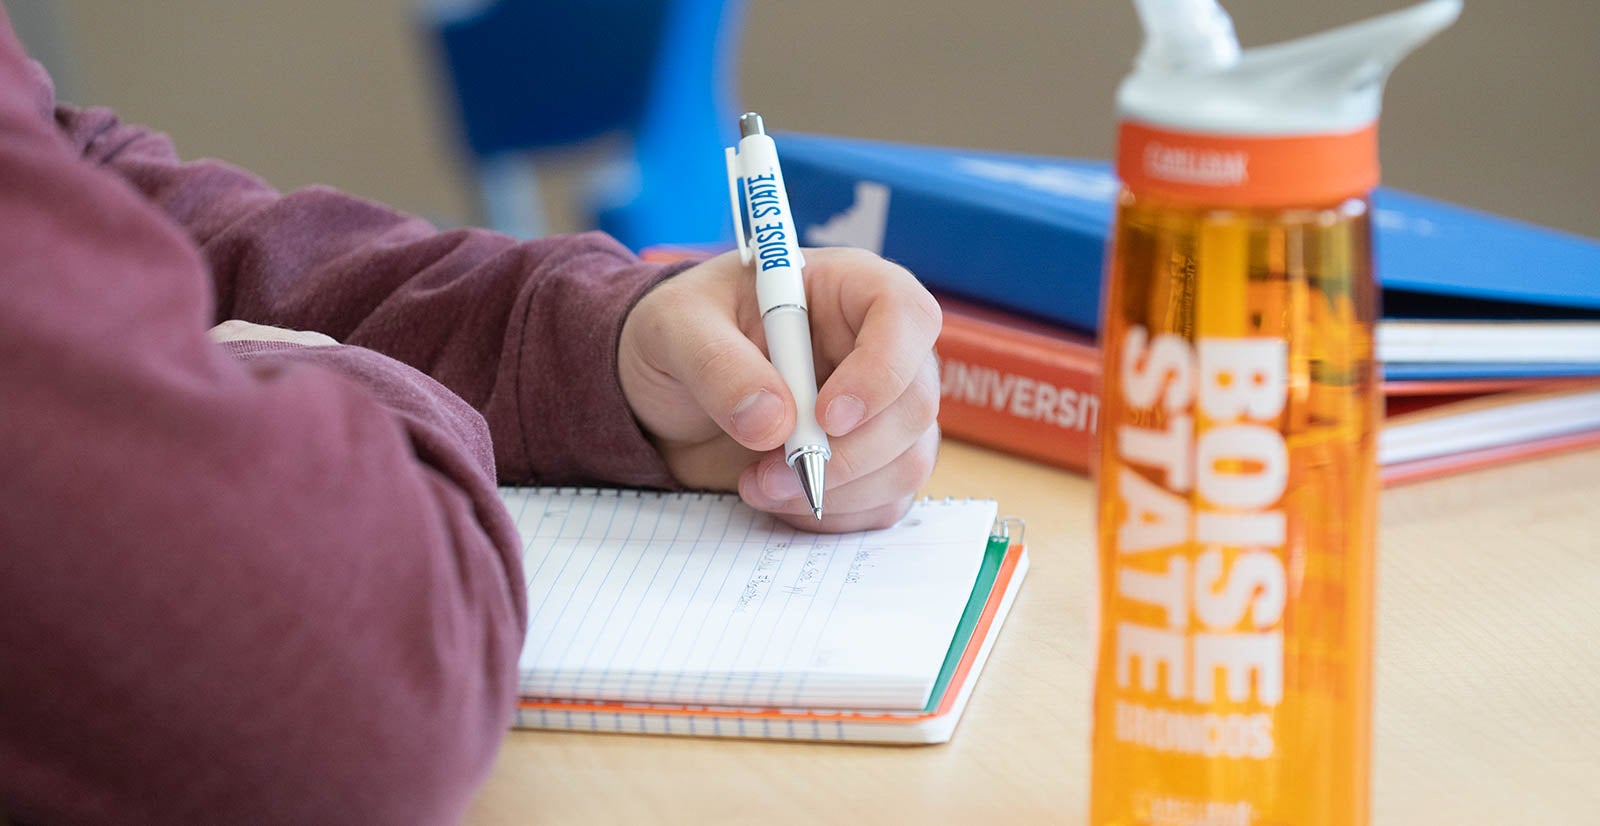 Student writes on Boise State branded material 